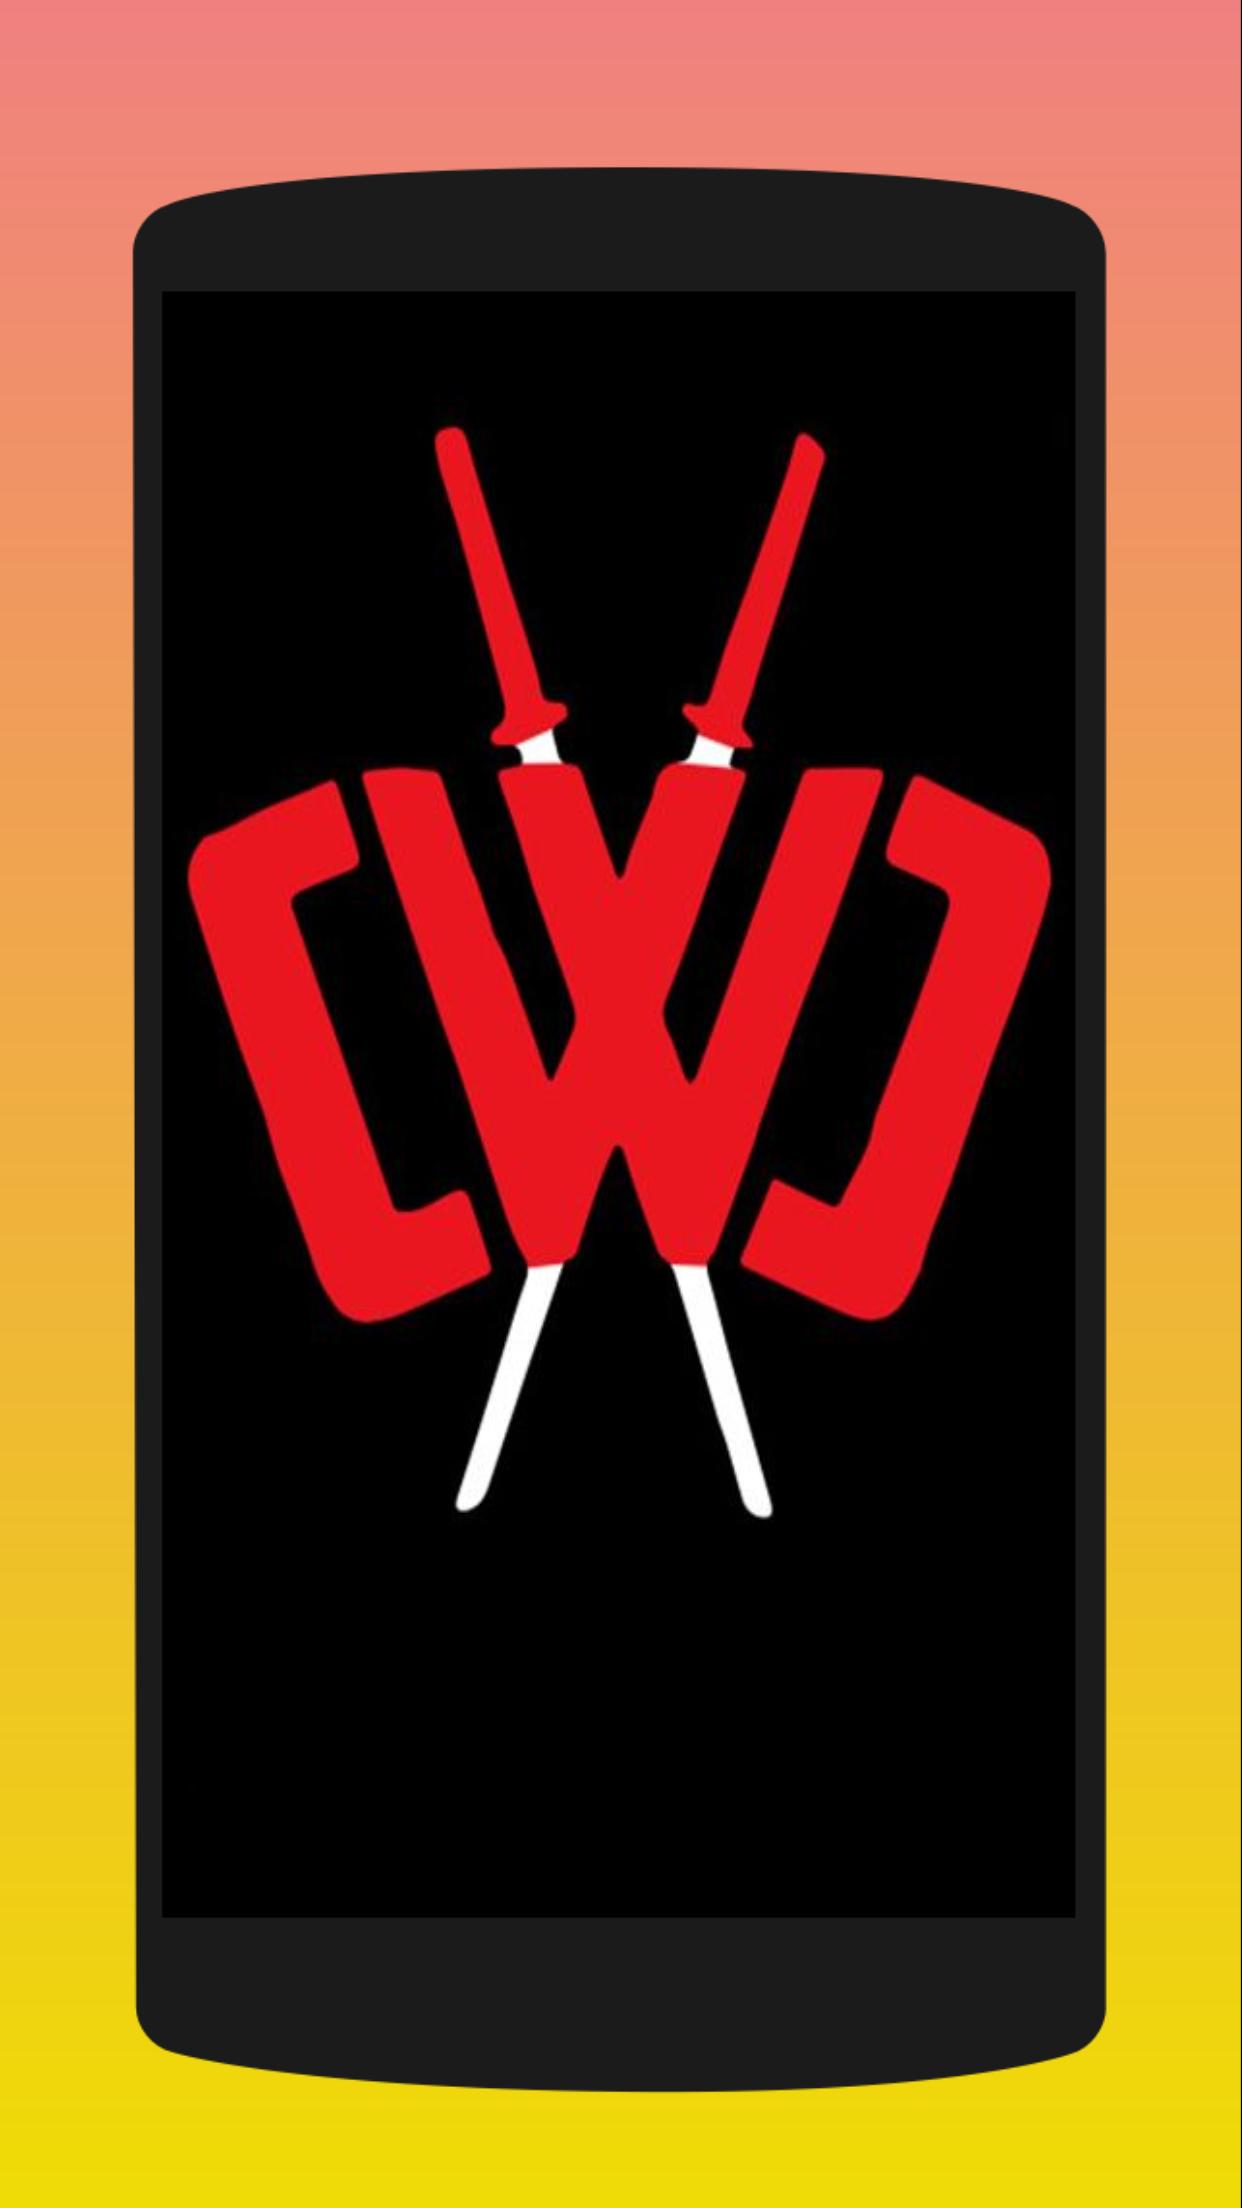 Cwc Wallpapers